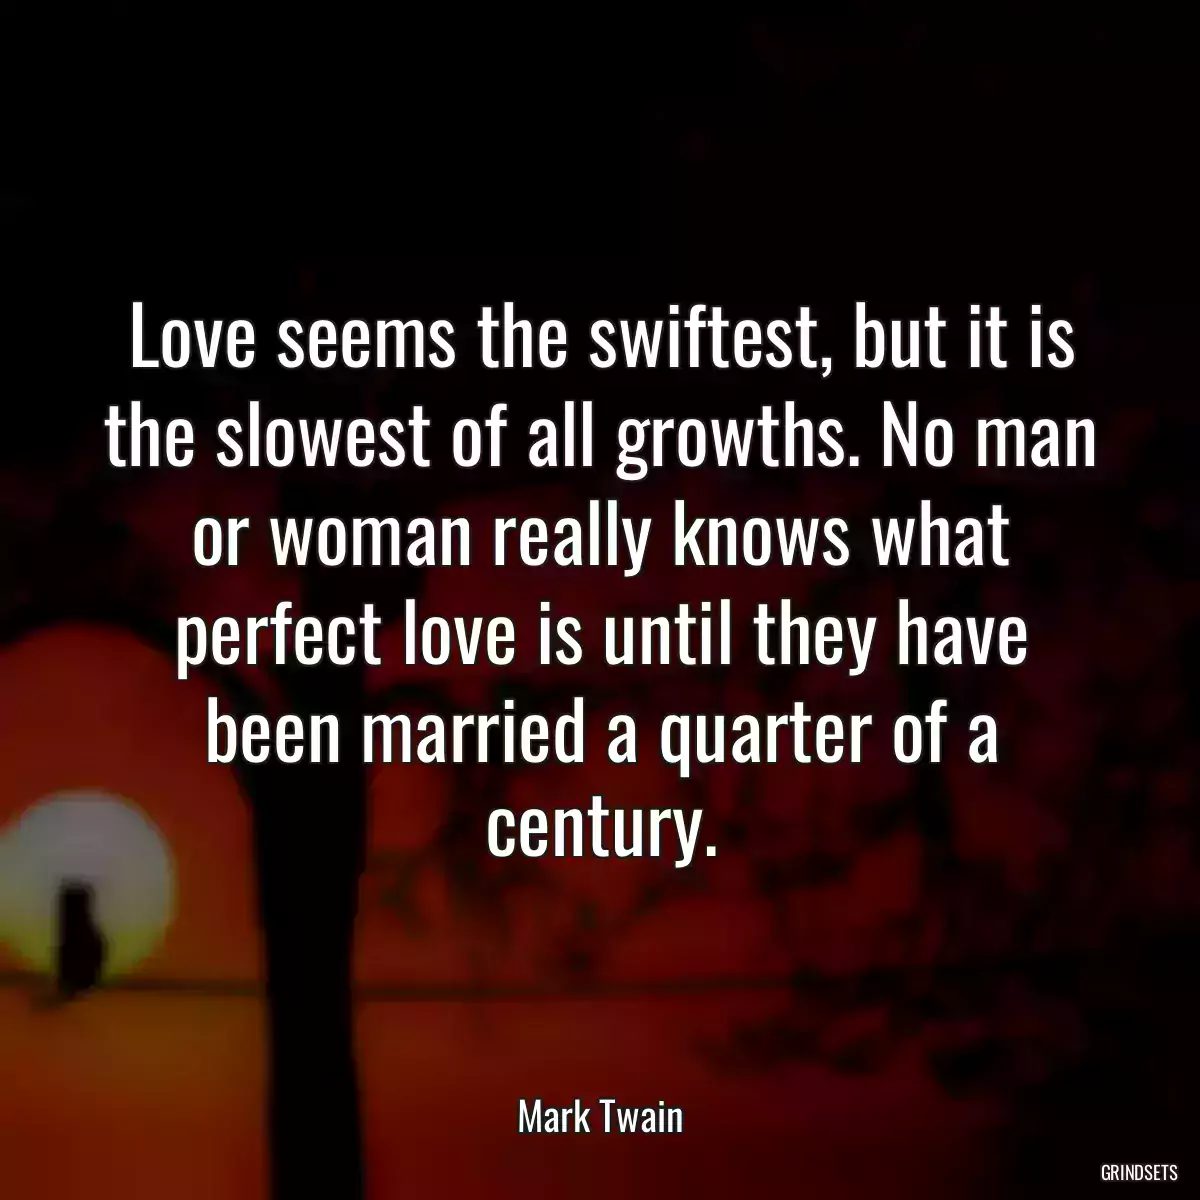 Love seems the swiftest, but it is the slowest of all growths. No man or woman really knows what perfect love is until they have been married a quarter of a century.